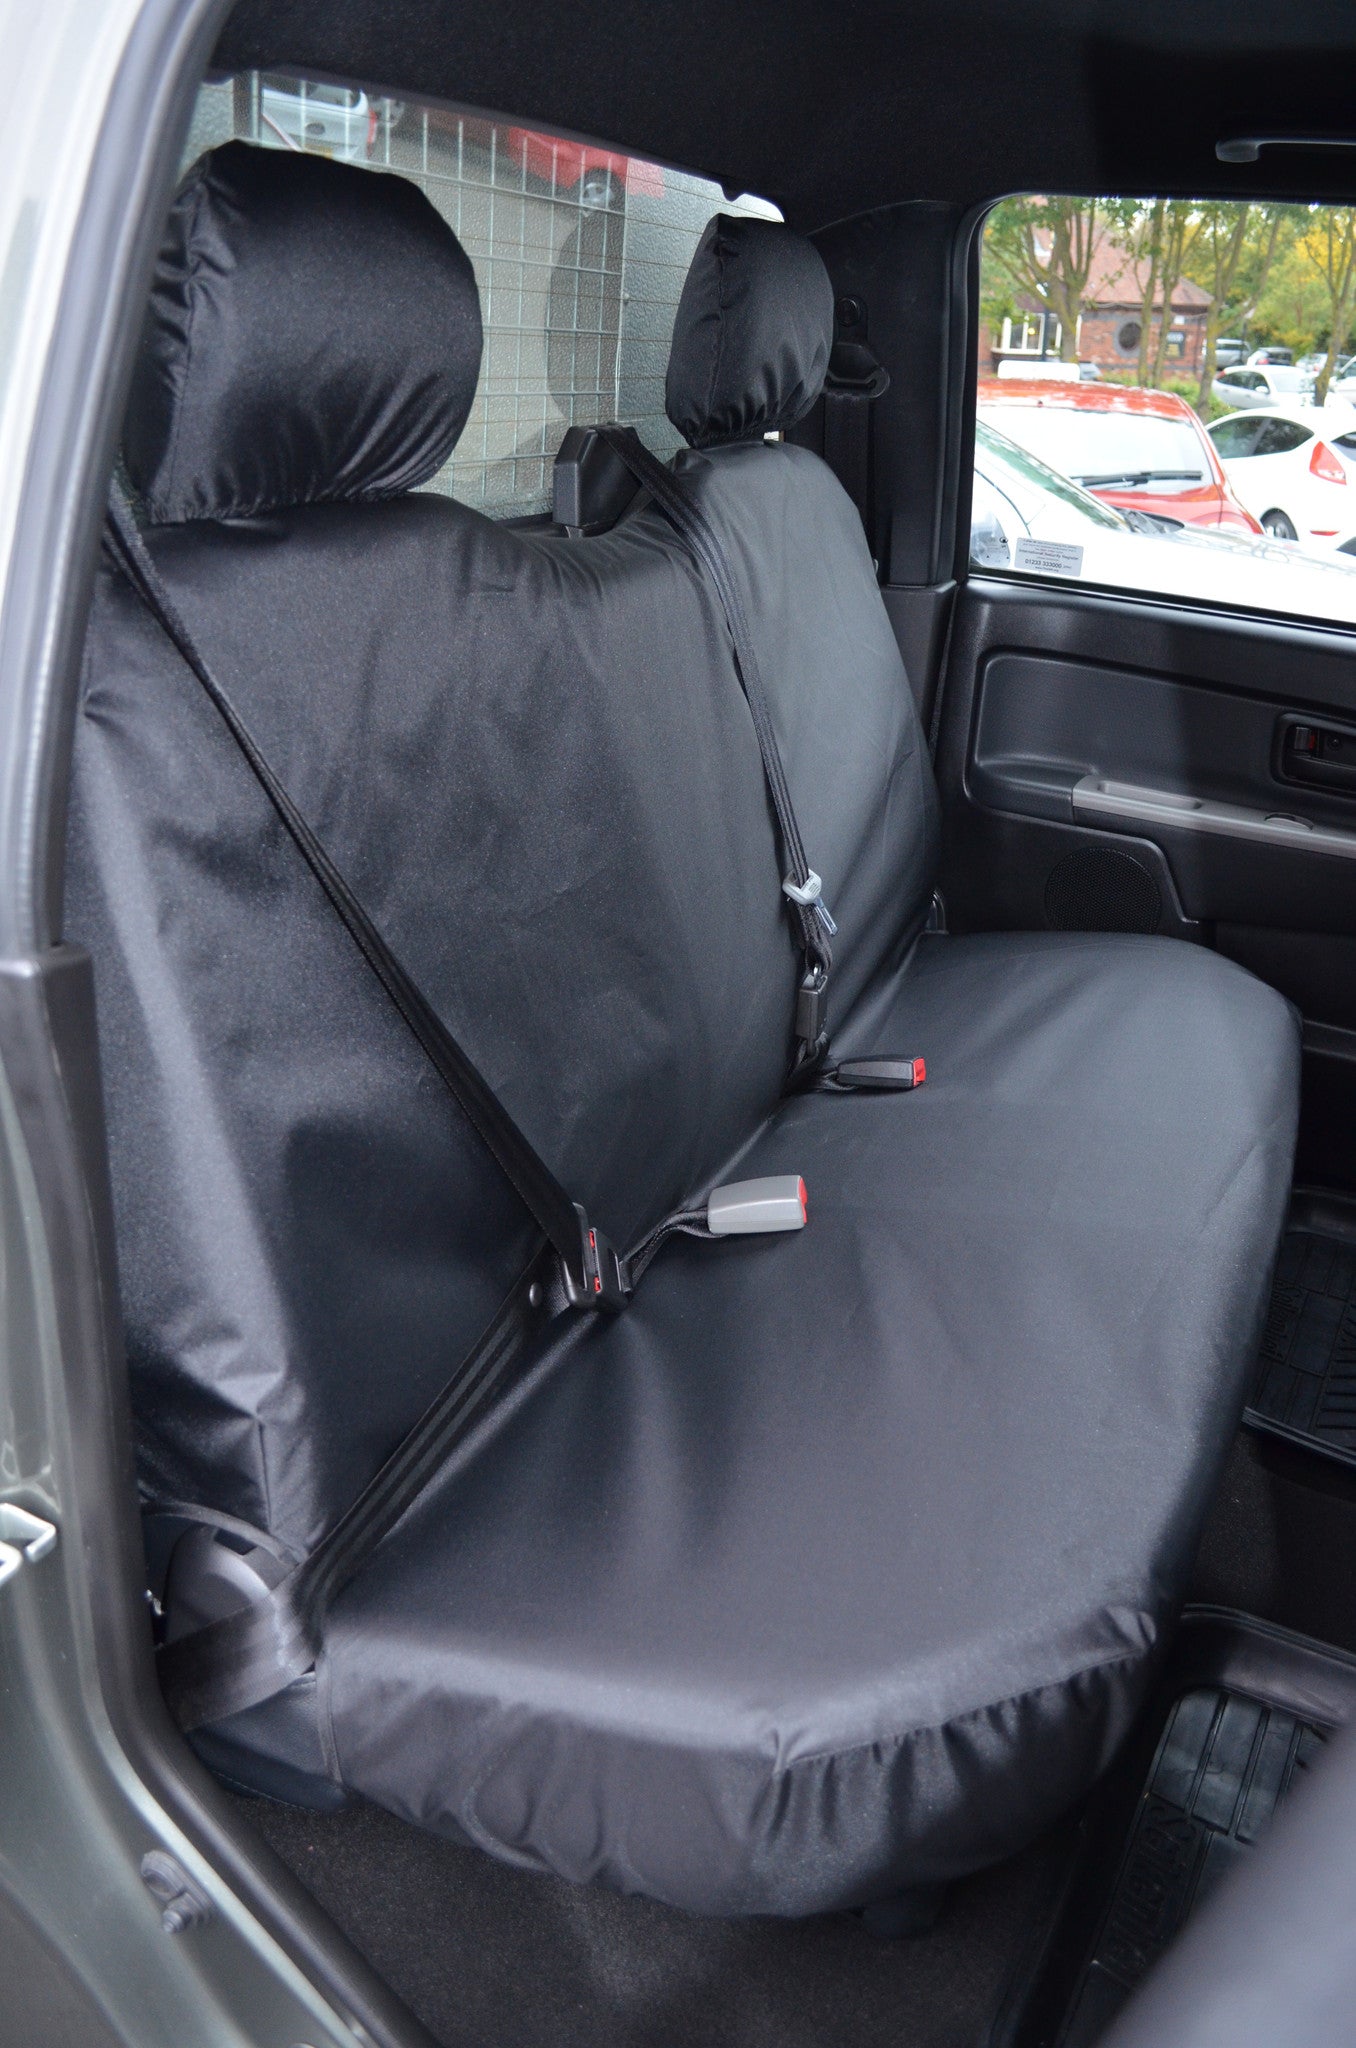 Isuzu Rodeo 2003 to 2012 Seat Covers Rear Seat Cover / Black Turtle Covers Ltd